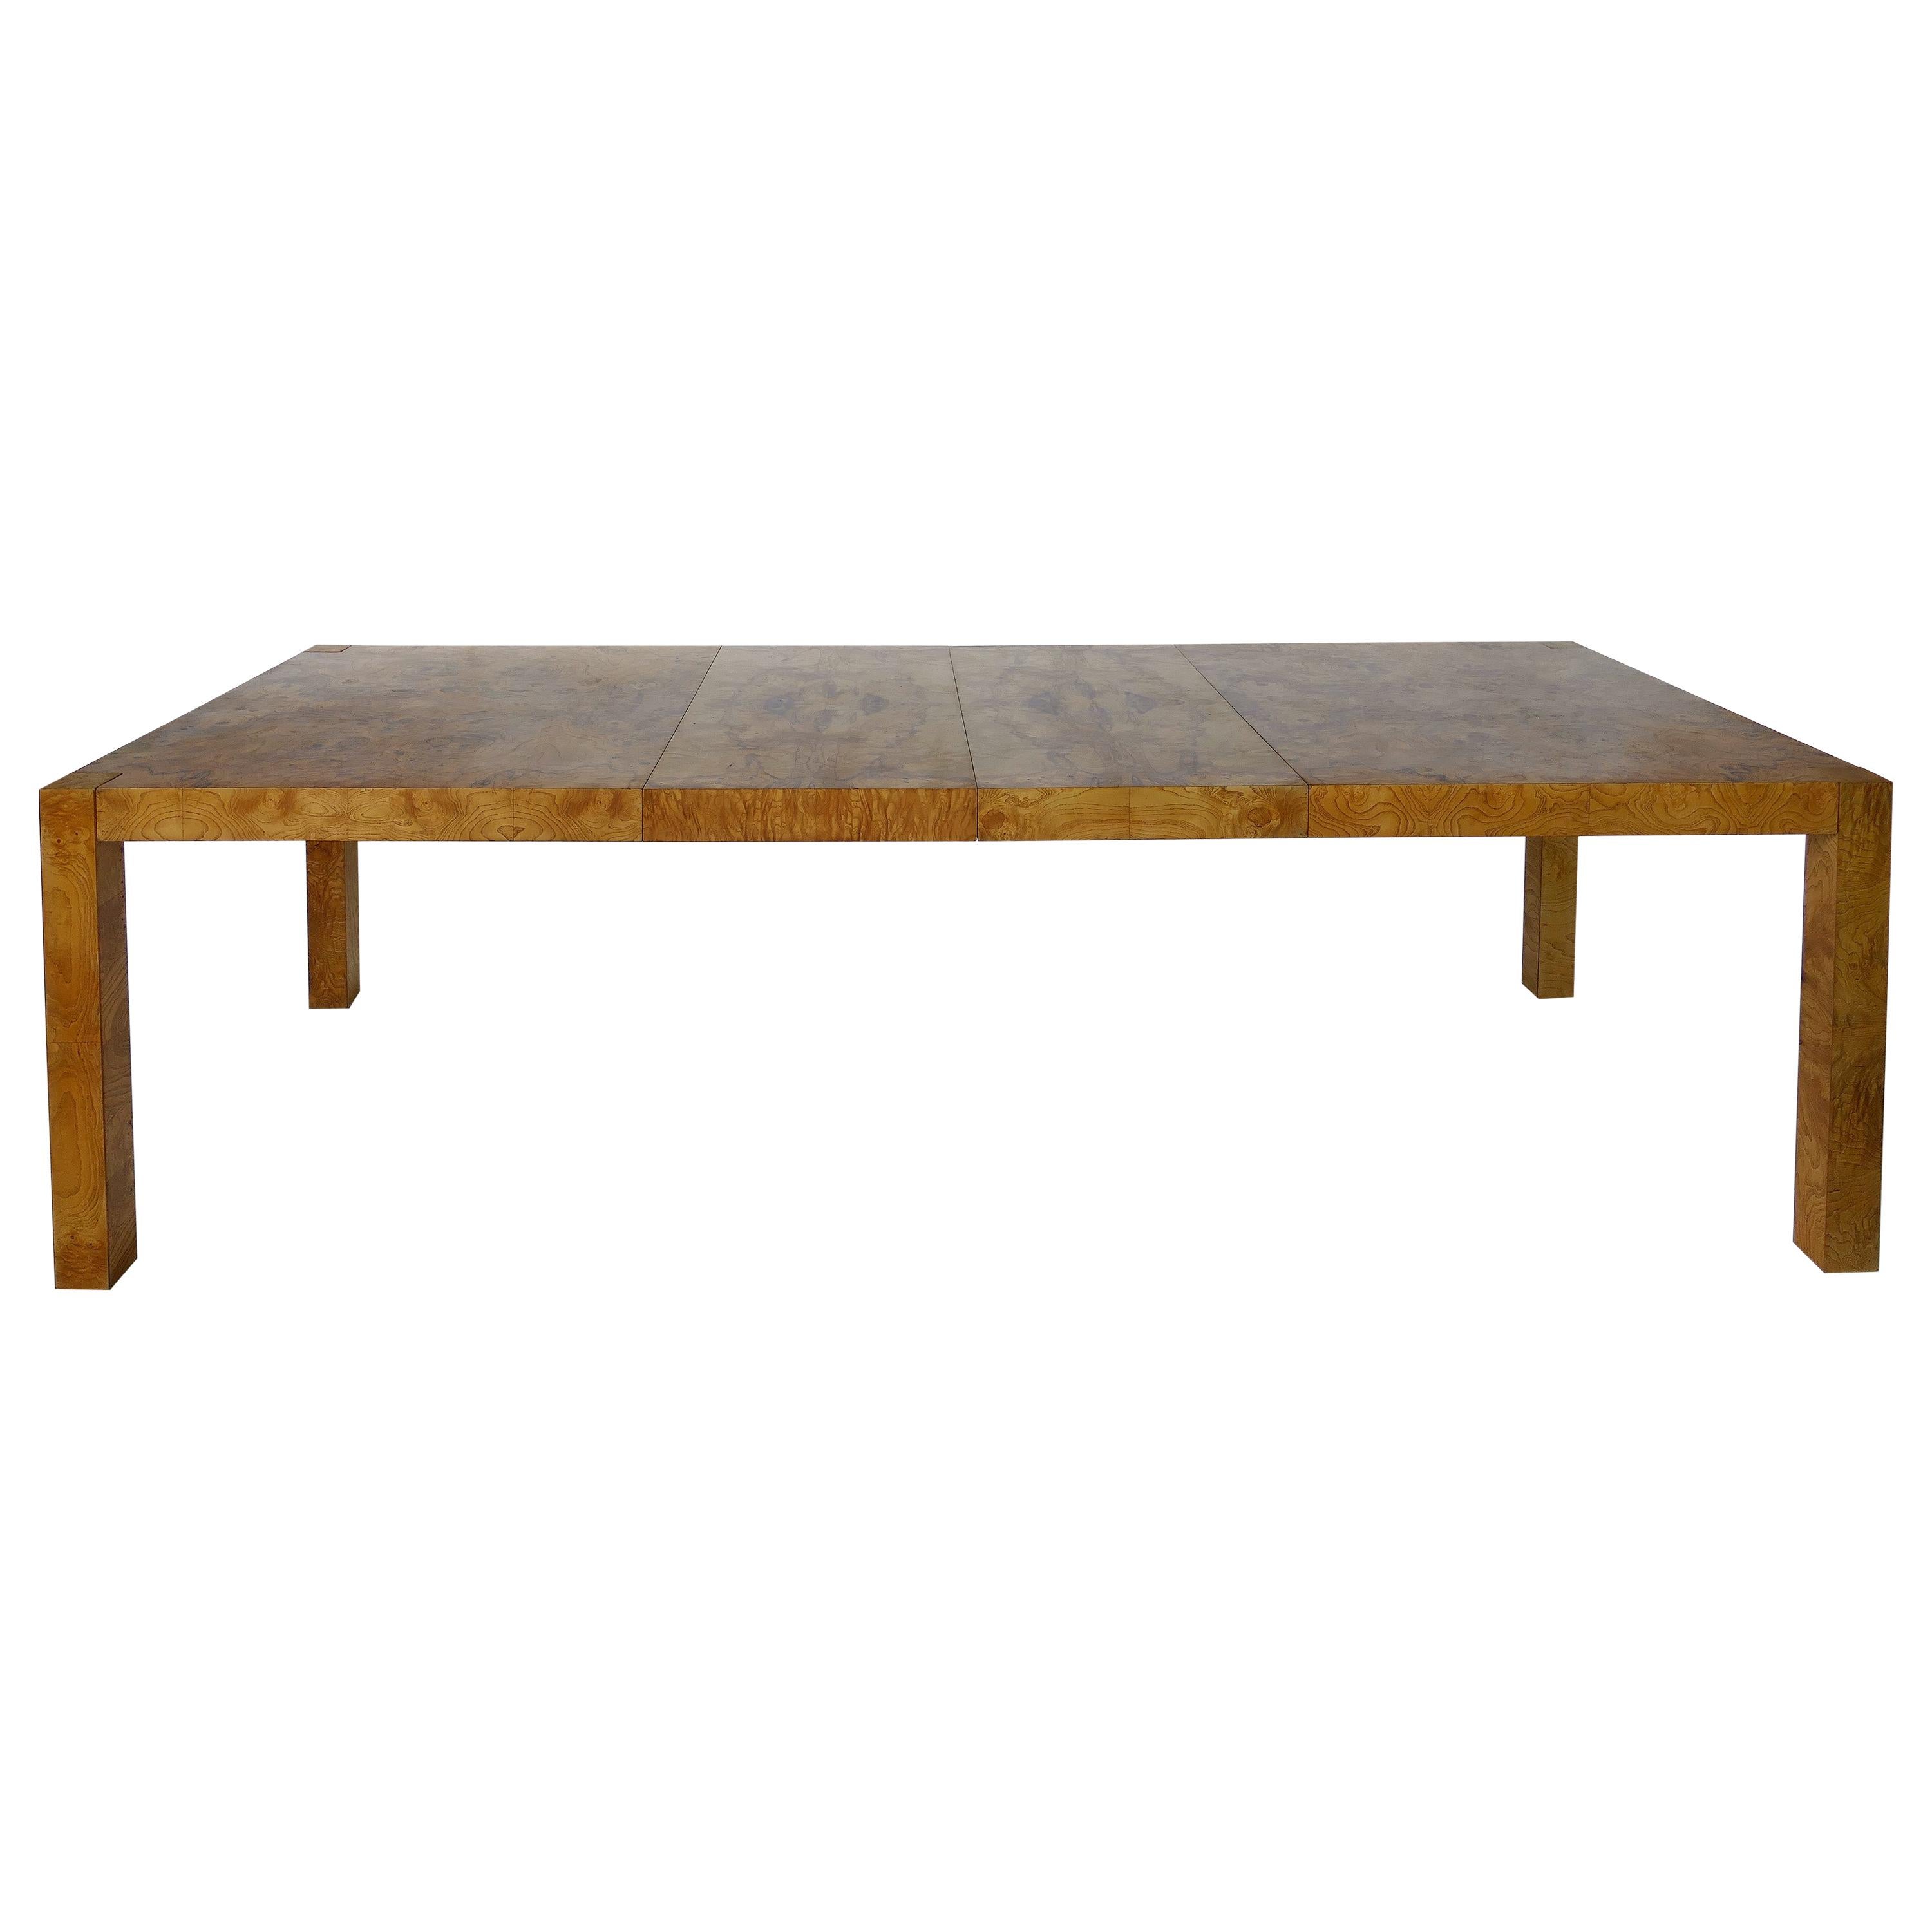 Modernage Furniture Burl Wood Dining Table with Two Additional Leaves